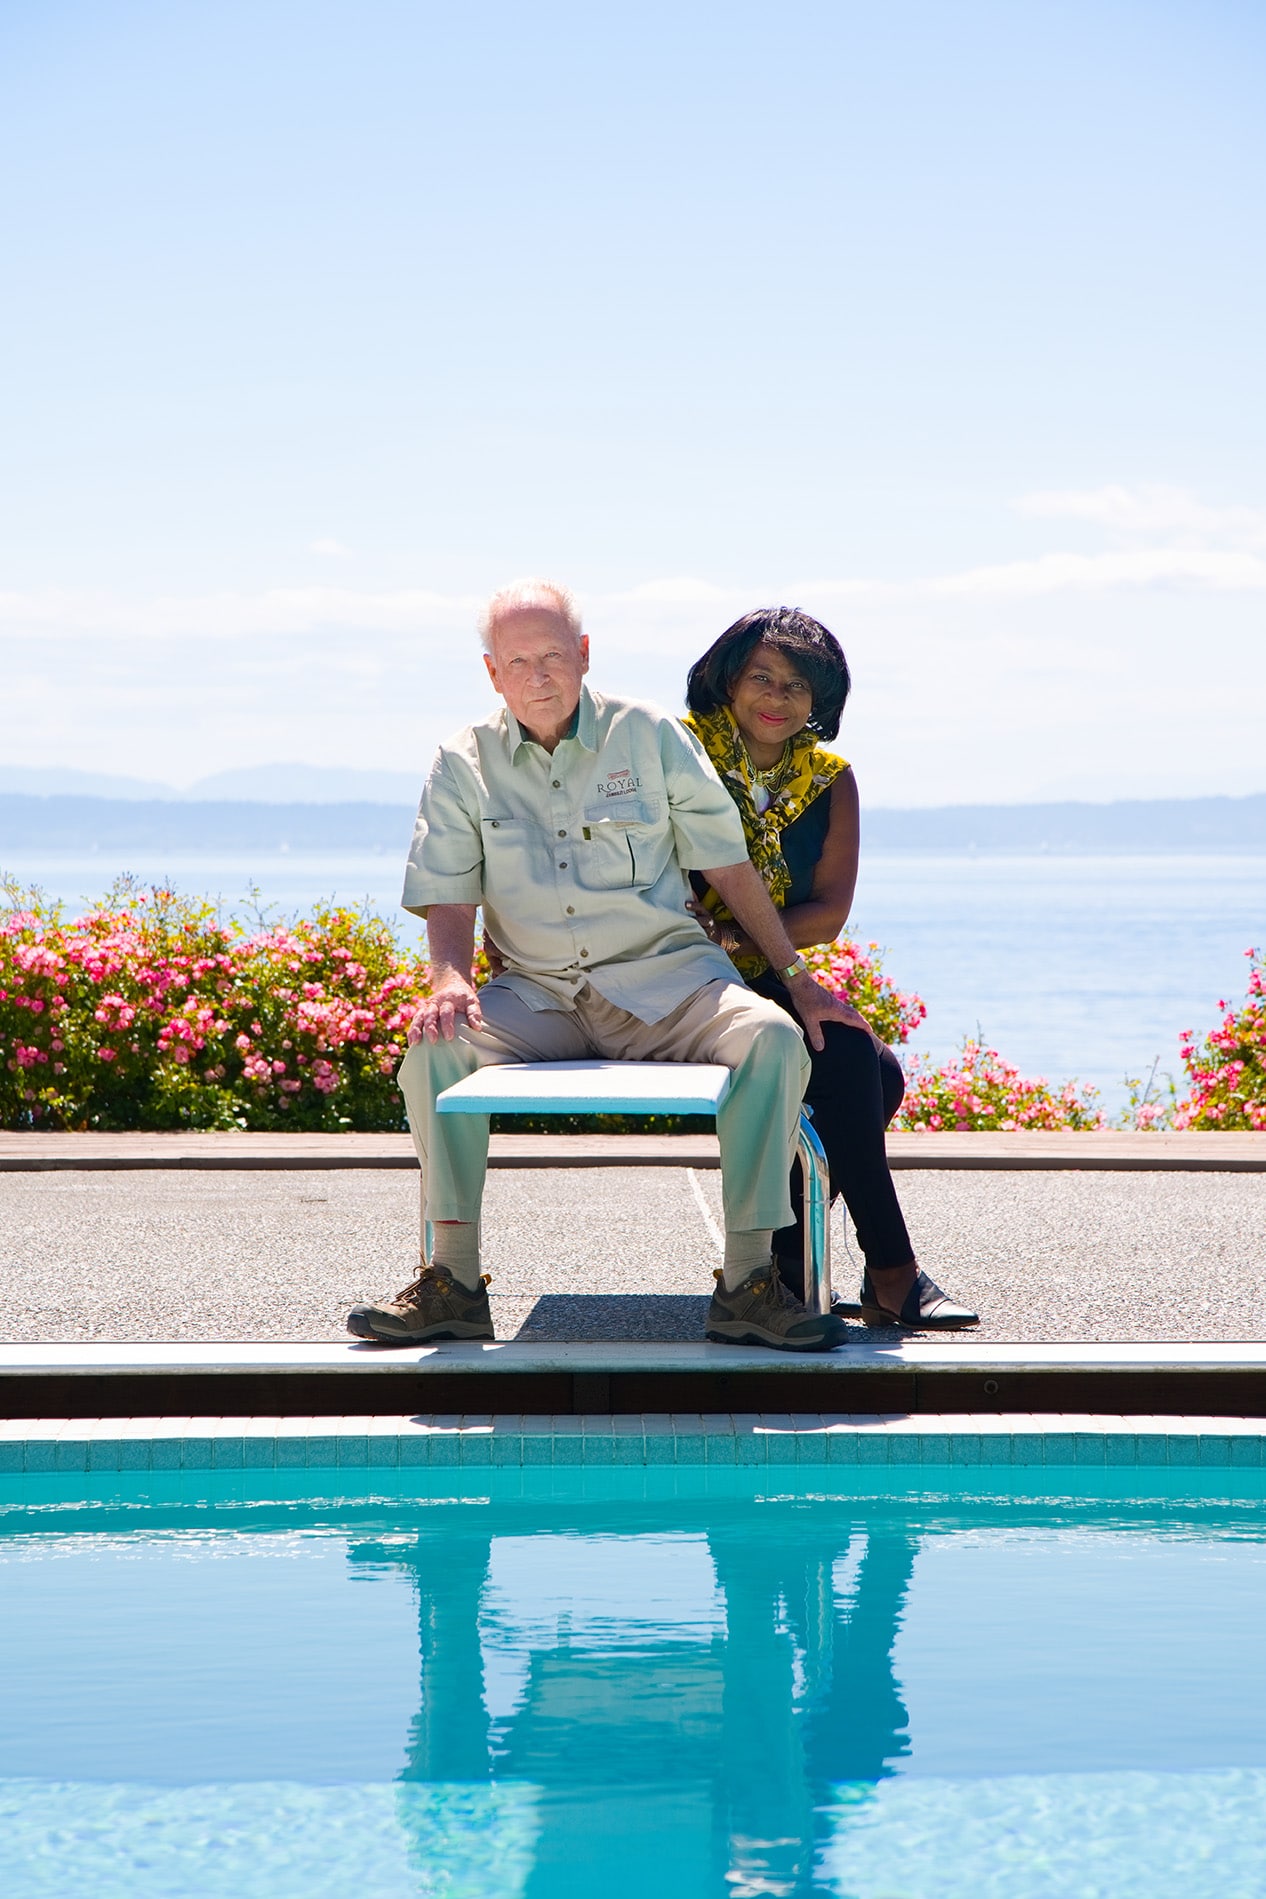 outdoor photo of elderly couple on a diving board